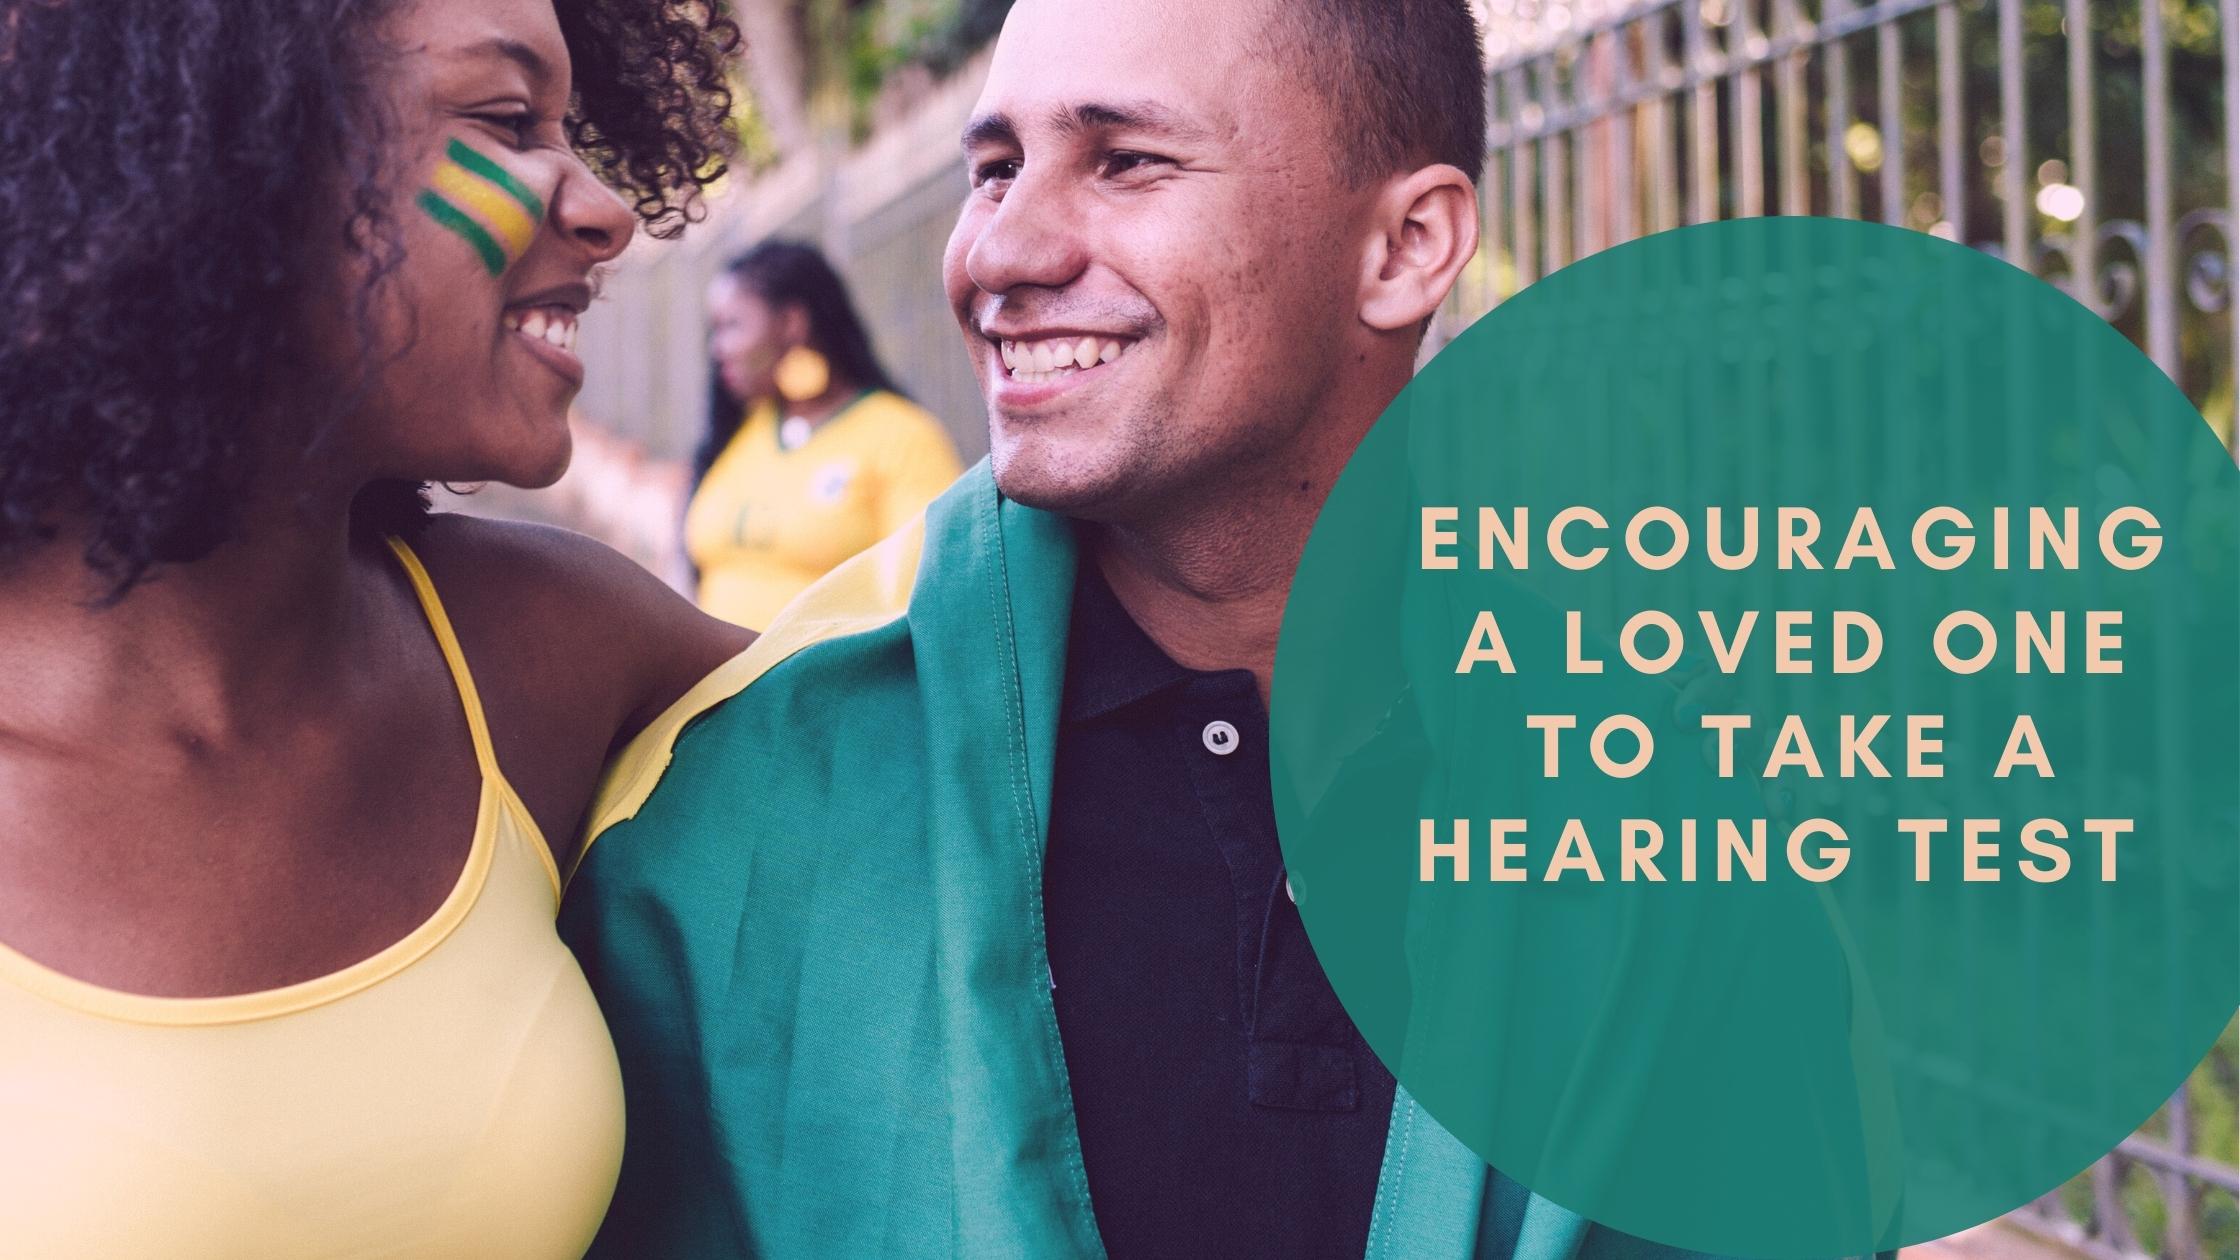 Featured image for “Encouraging a Loved One to Take a Hearing Test”